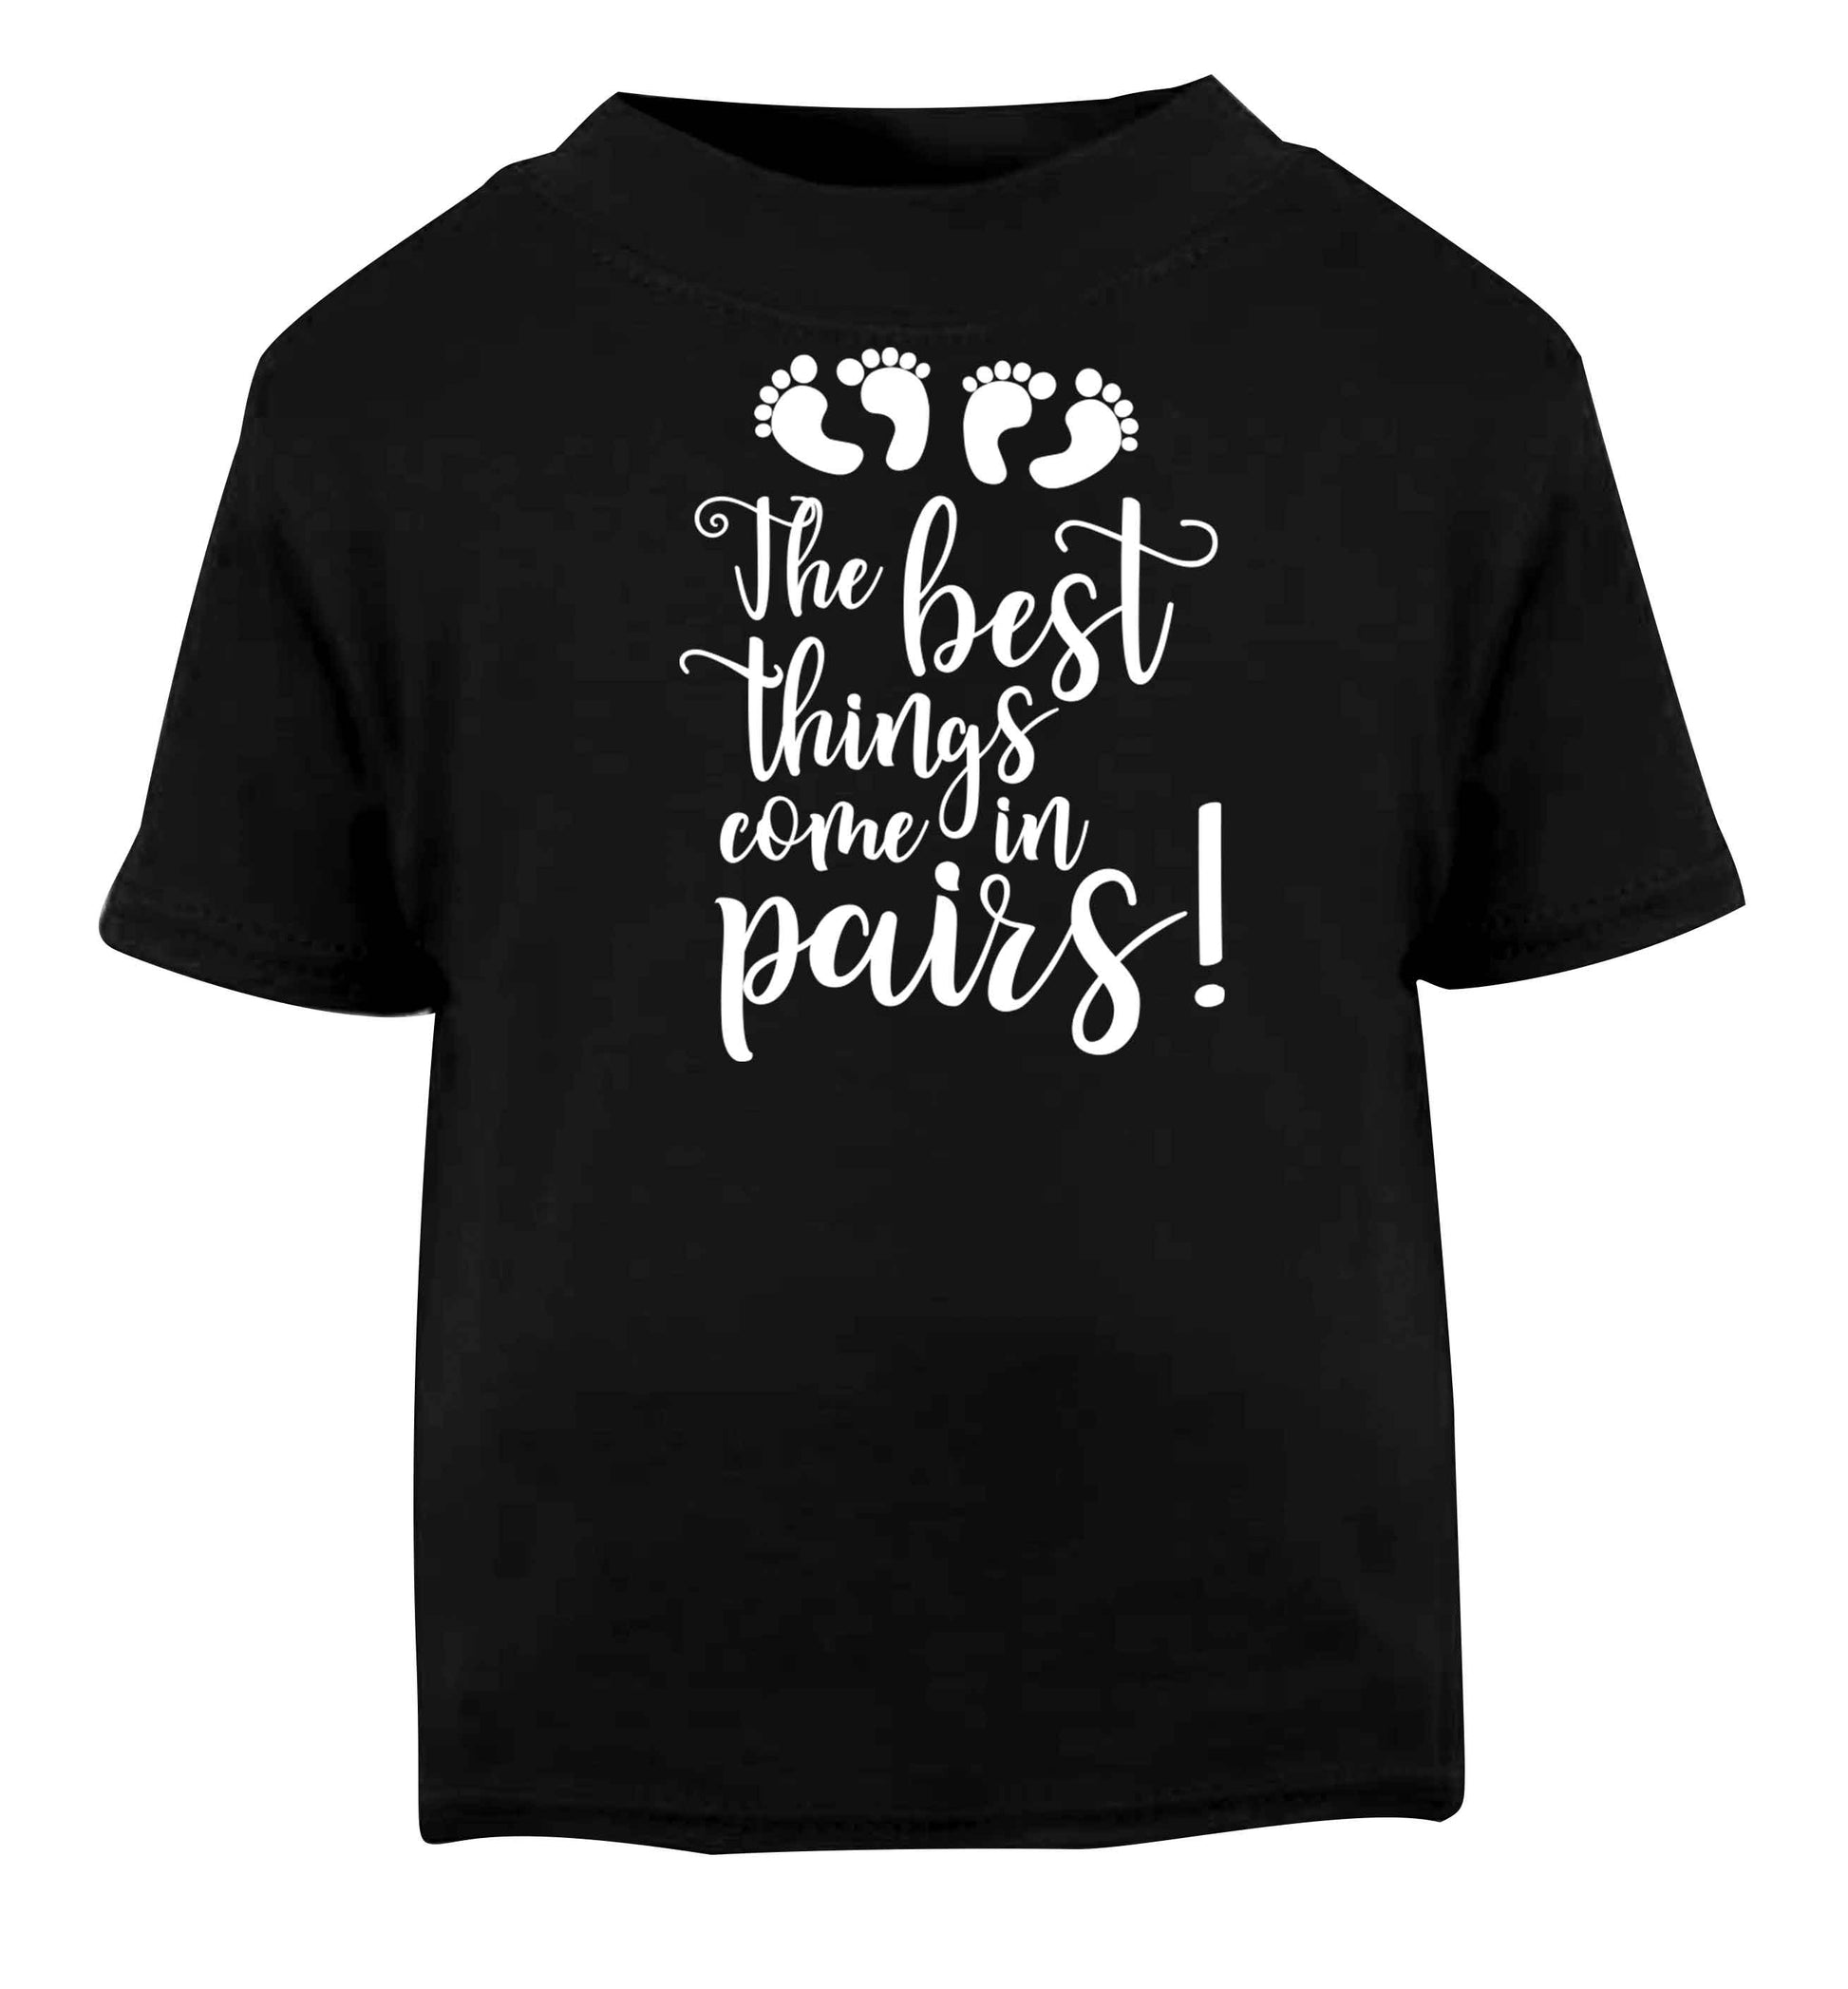 The best things come in pairs! Black baby toddler Tshirt 2 years